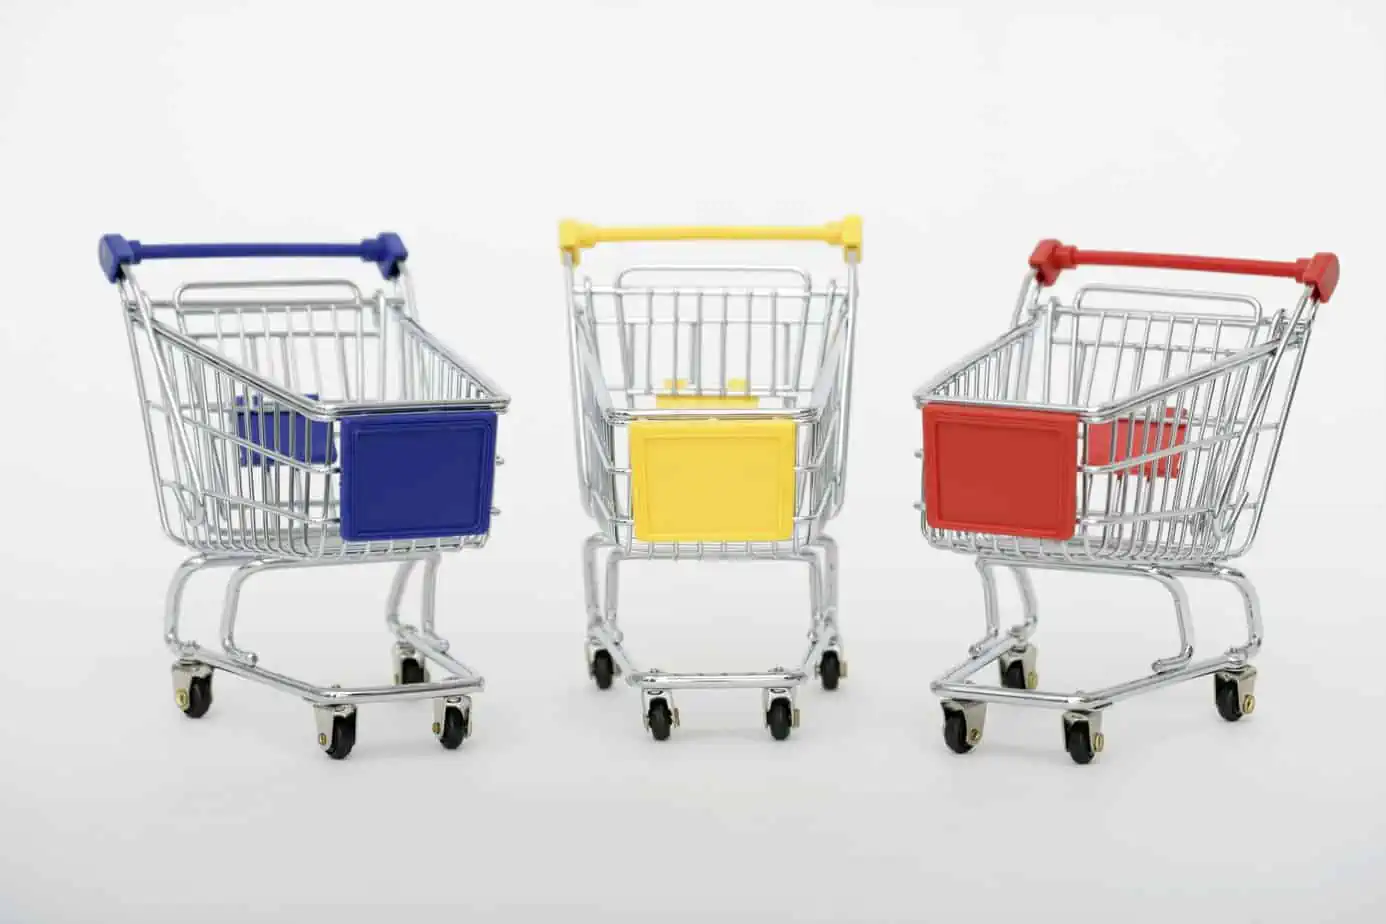 online-shopping-carts